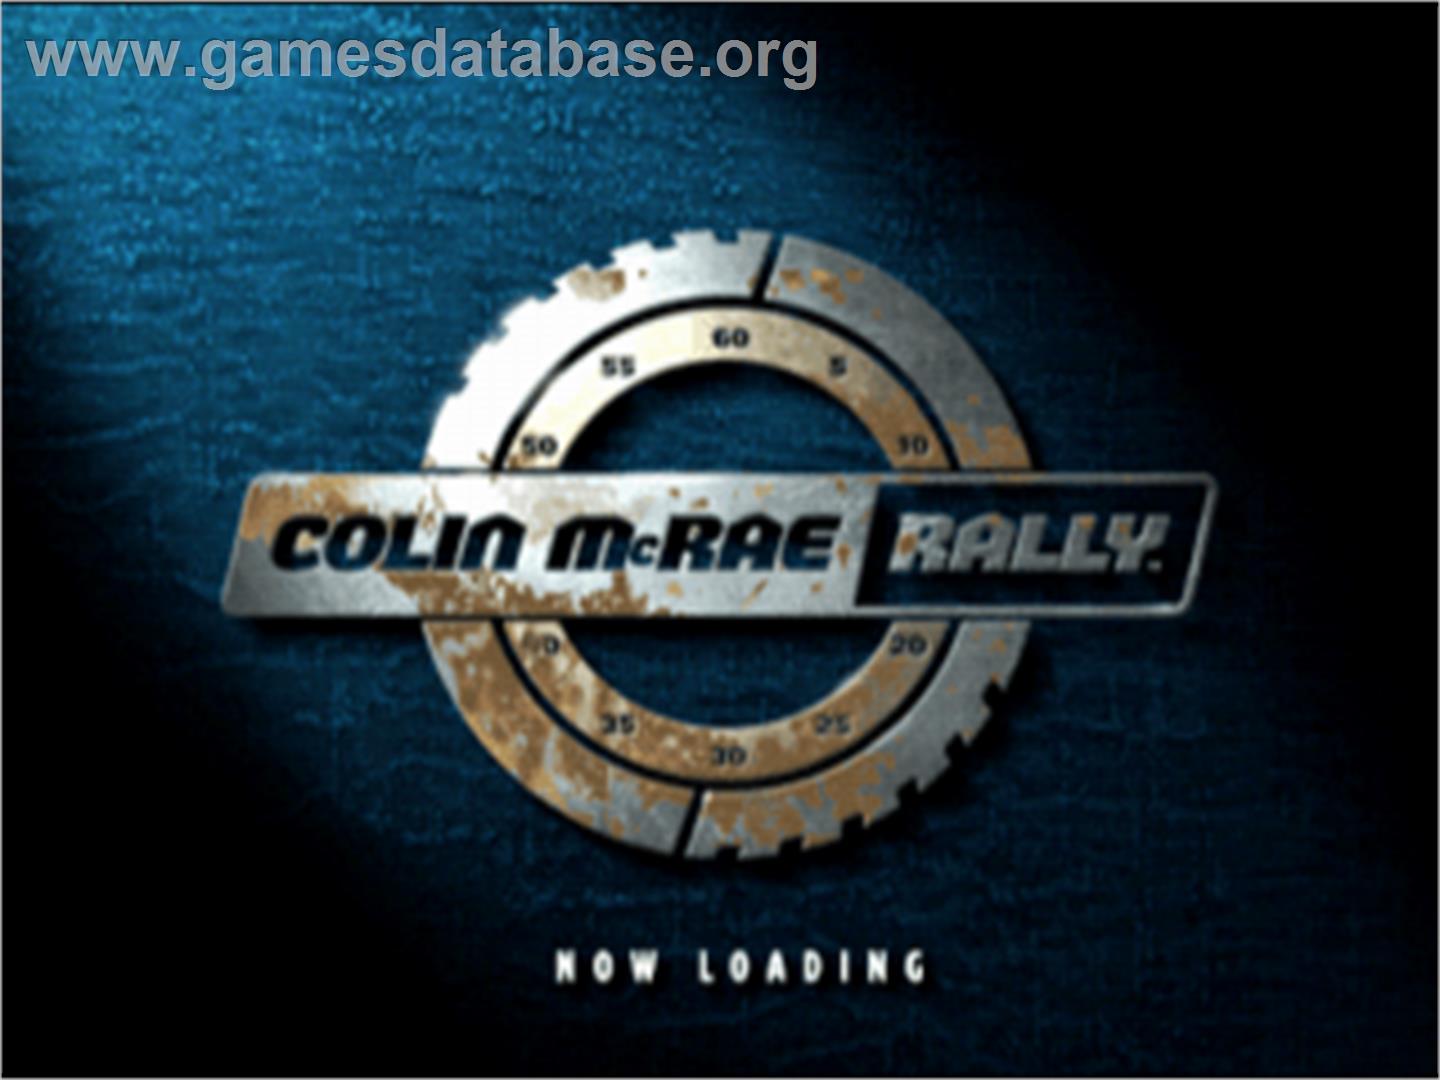 Colin McRae Rally - Sony Playstation - Artwork - Title Screen